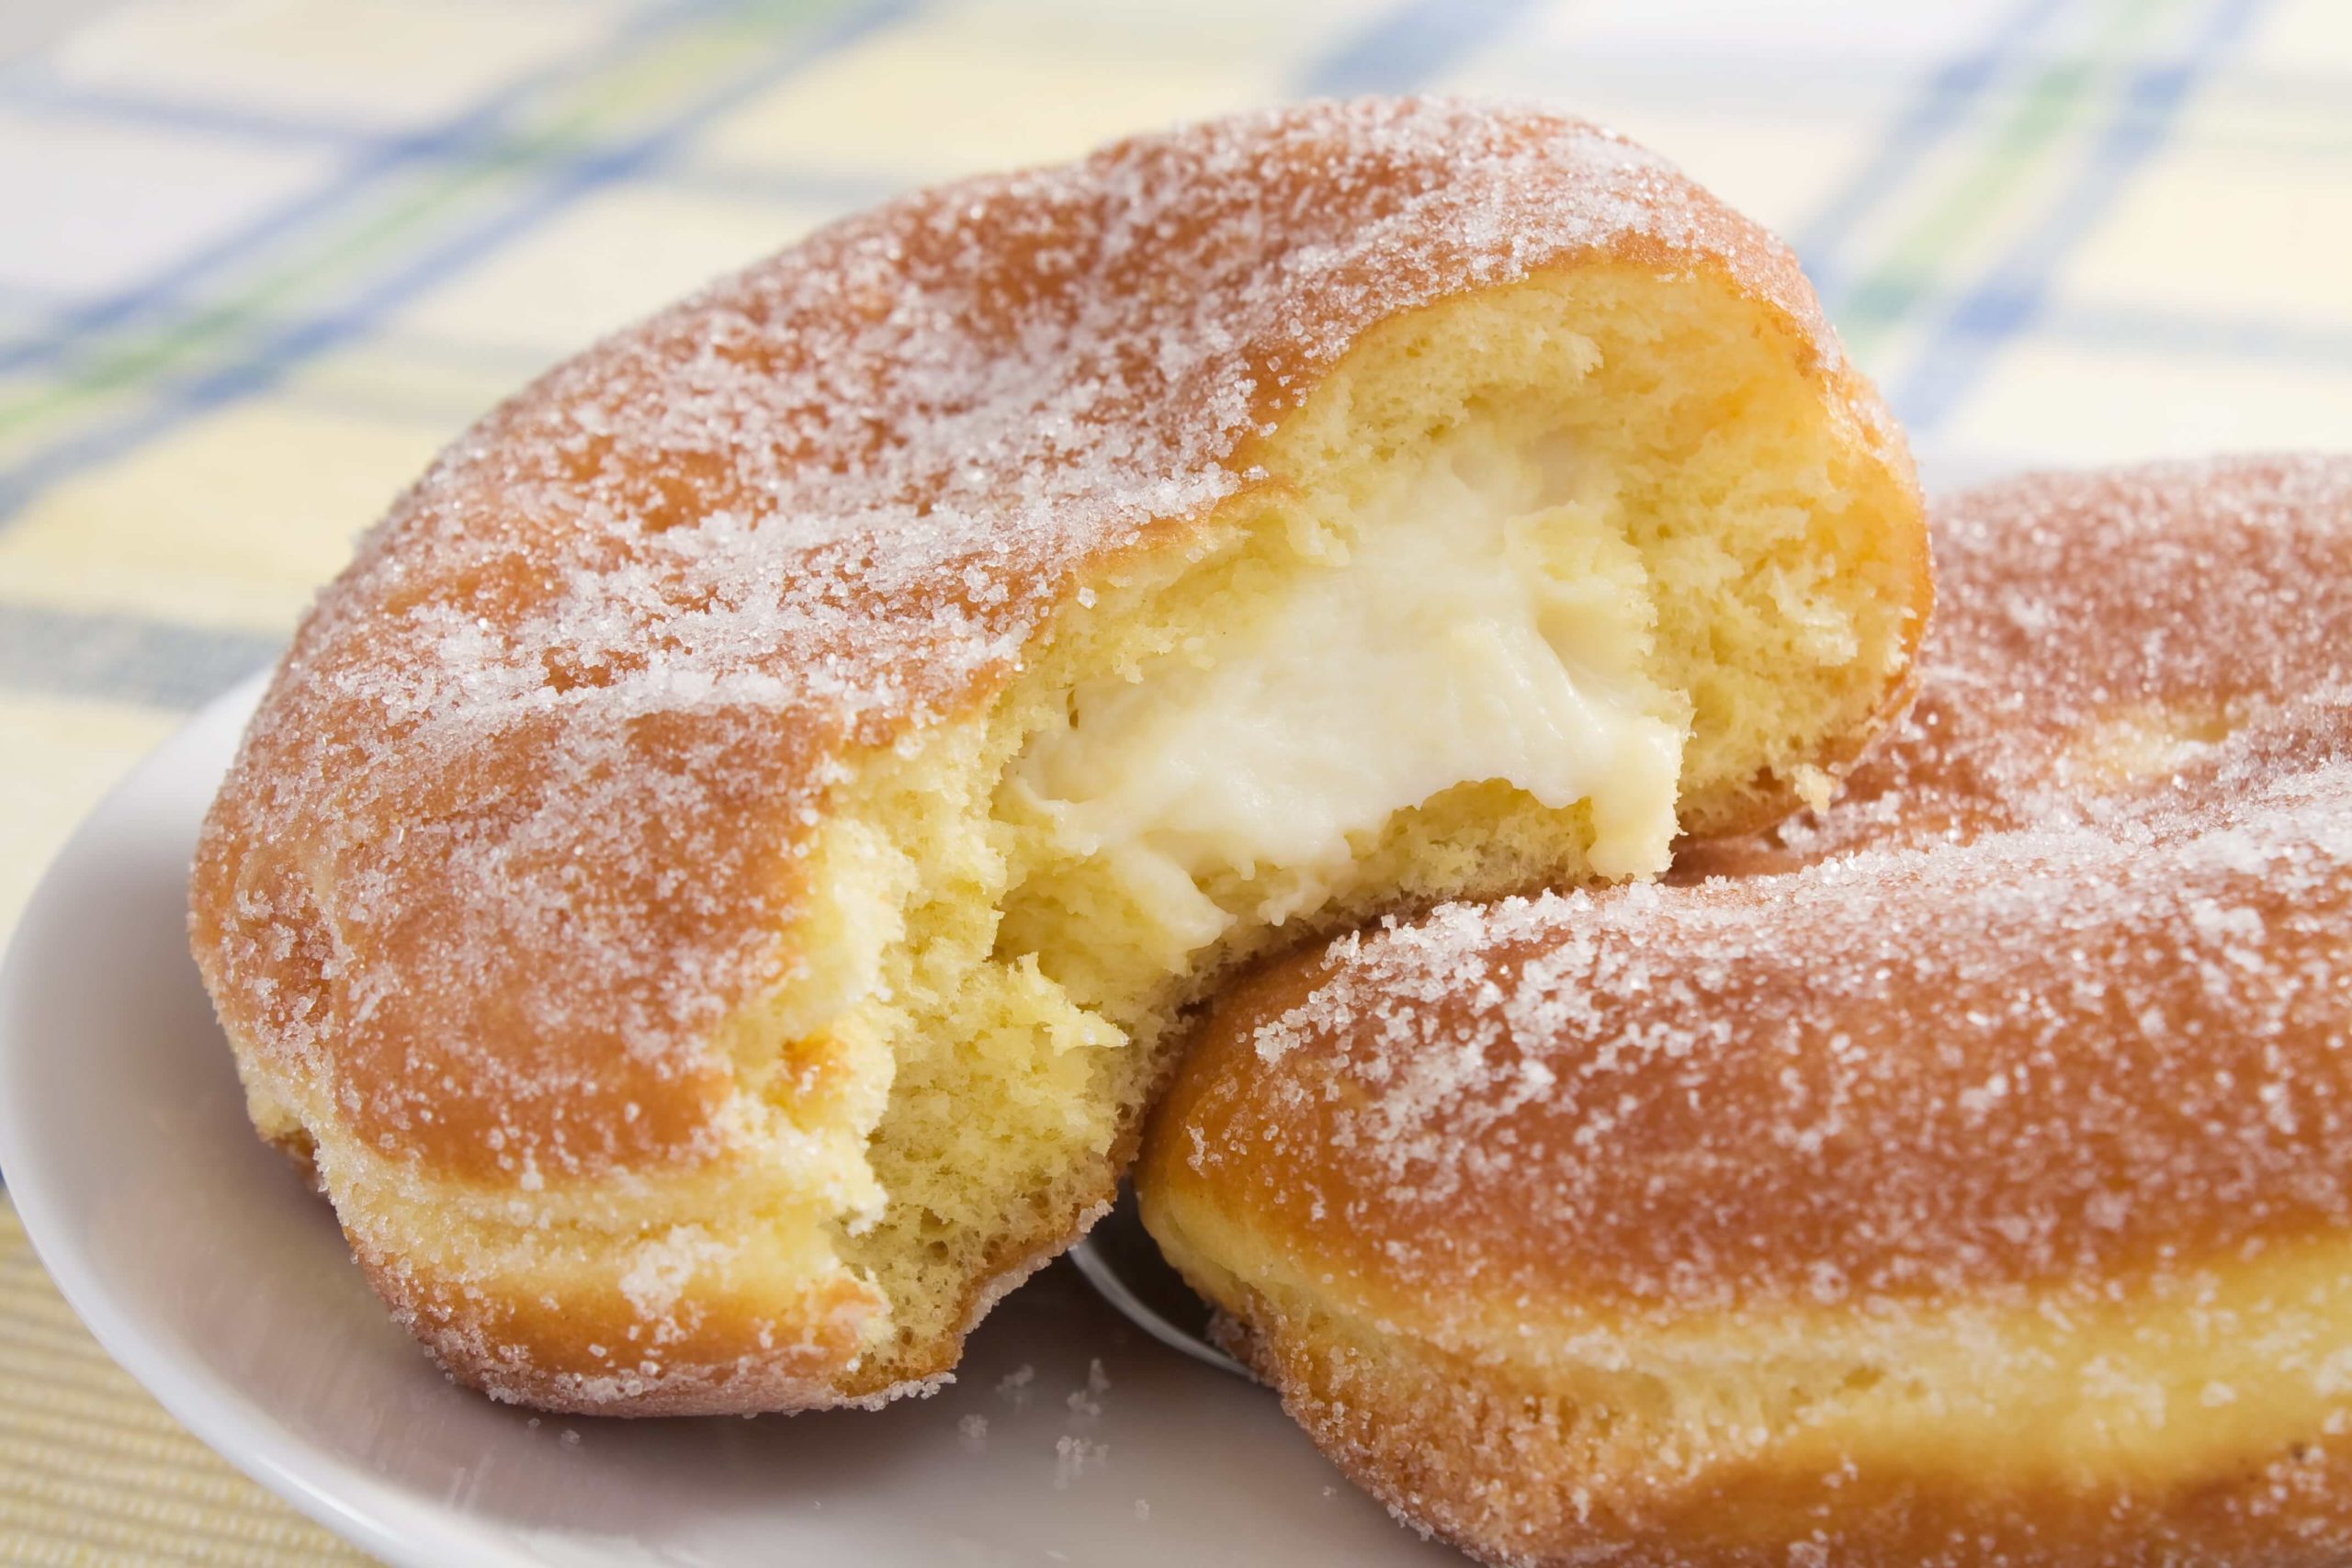 Fasnacht donut with cream inside.